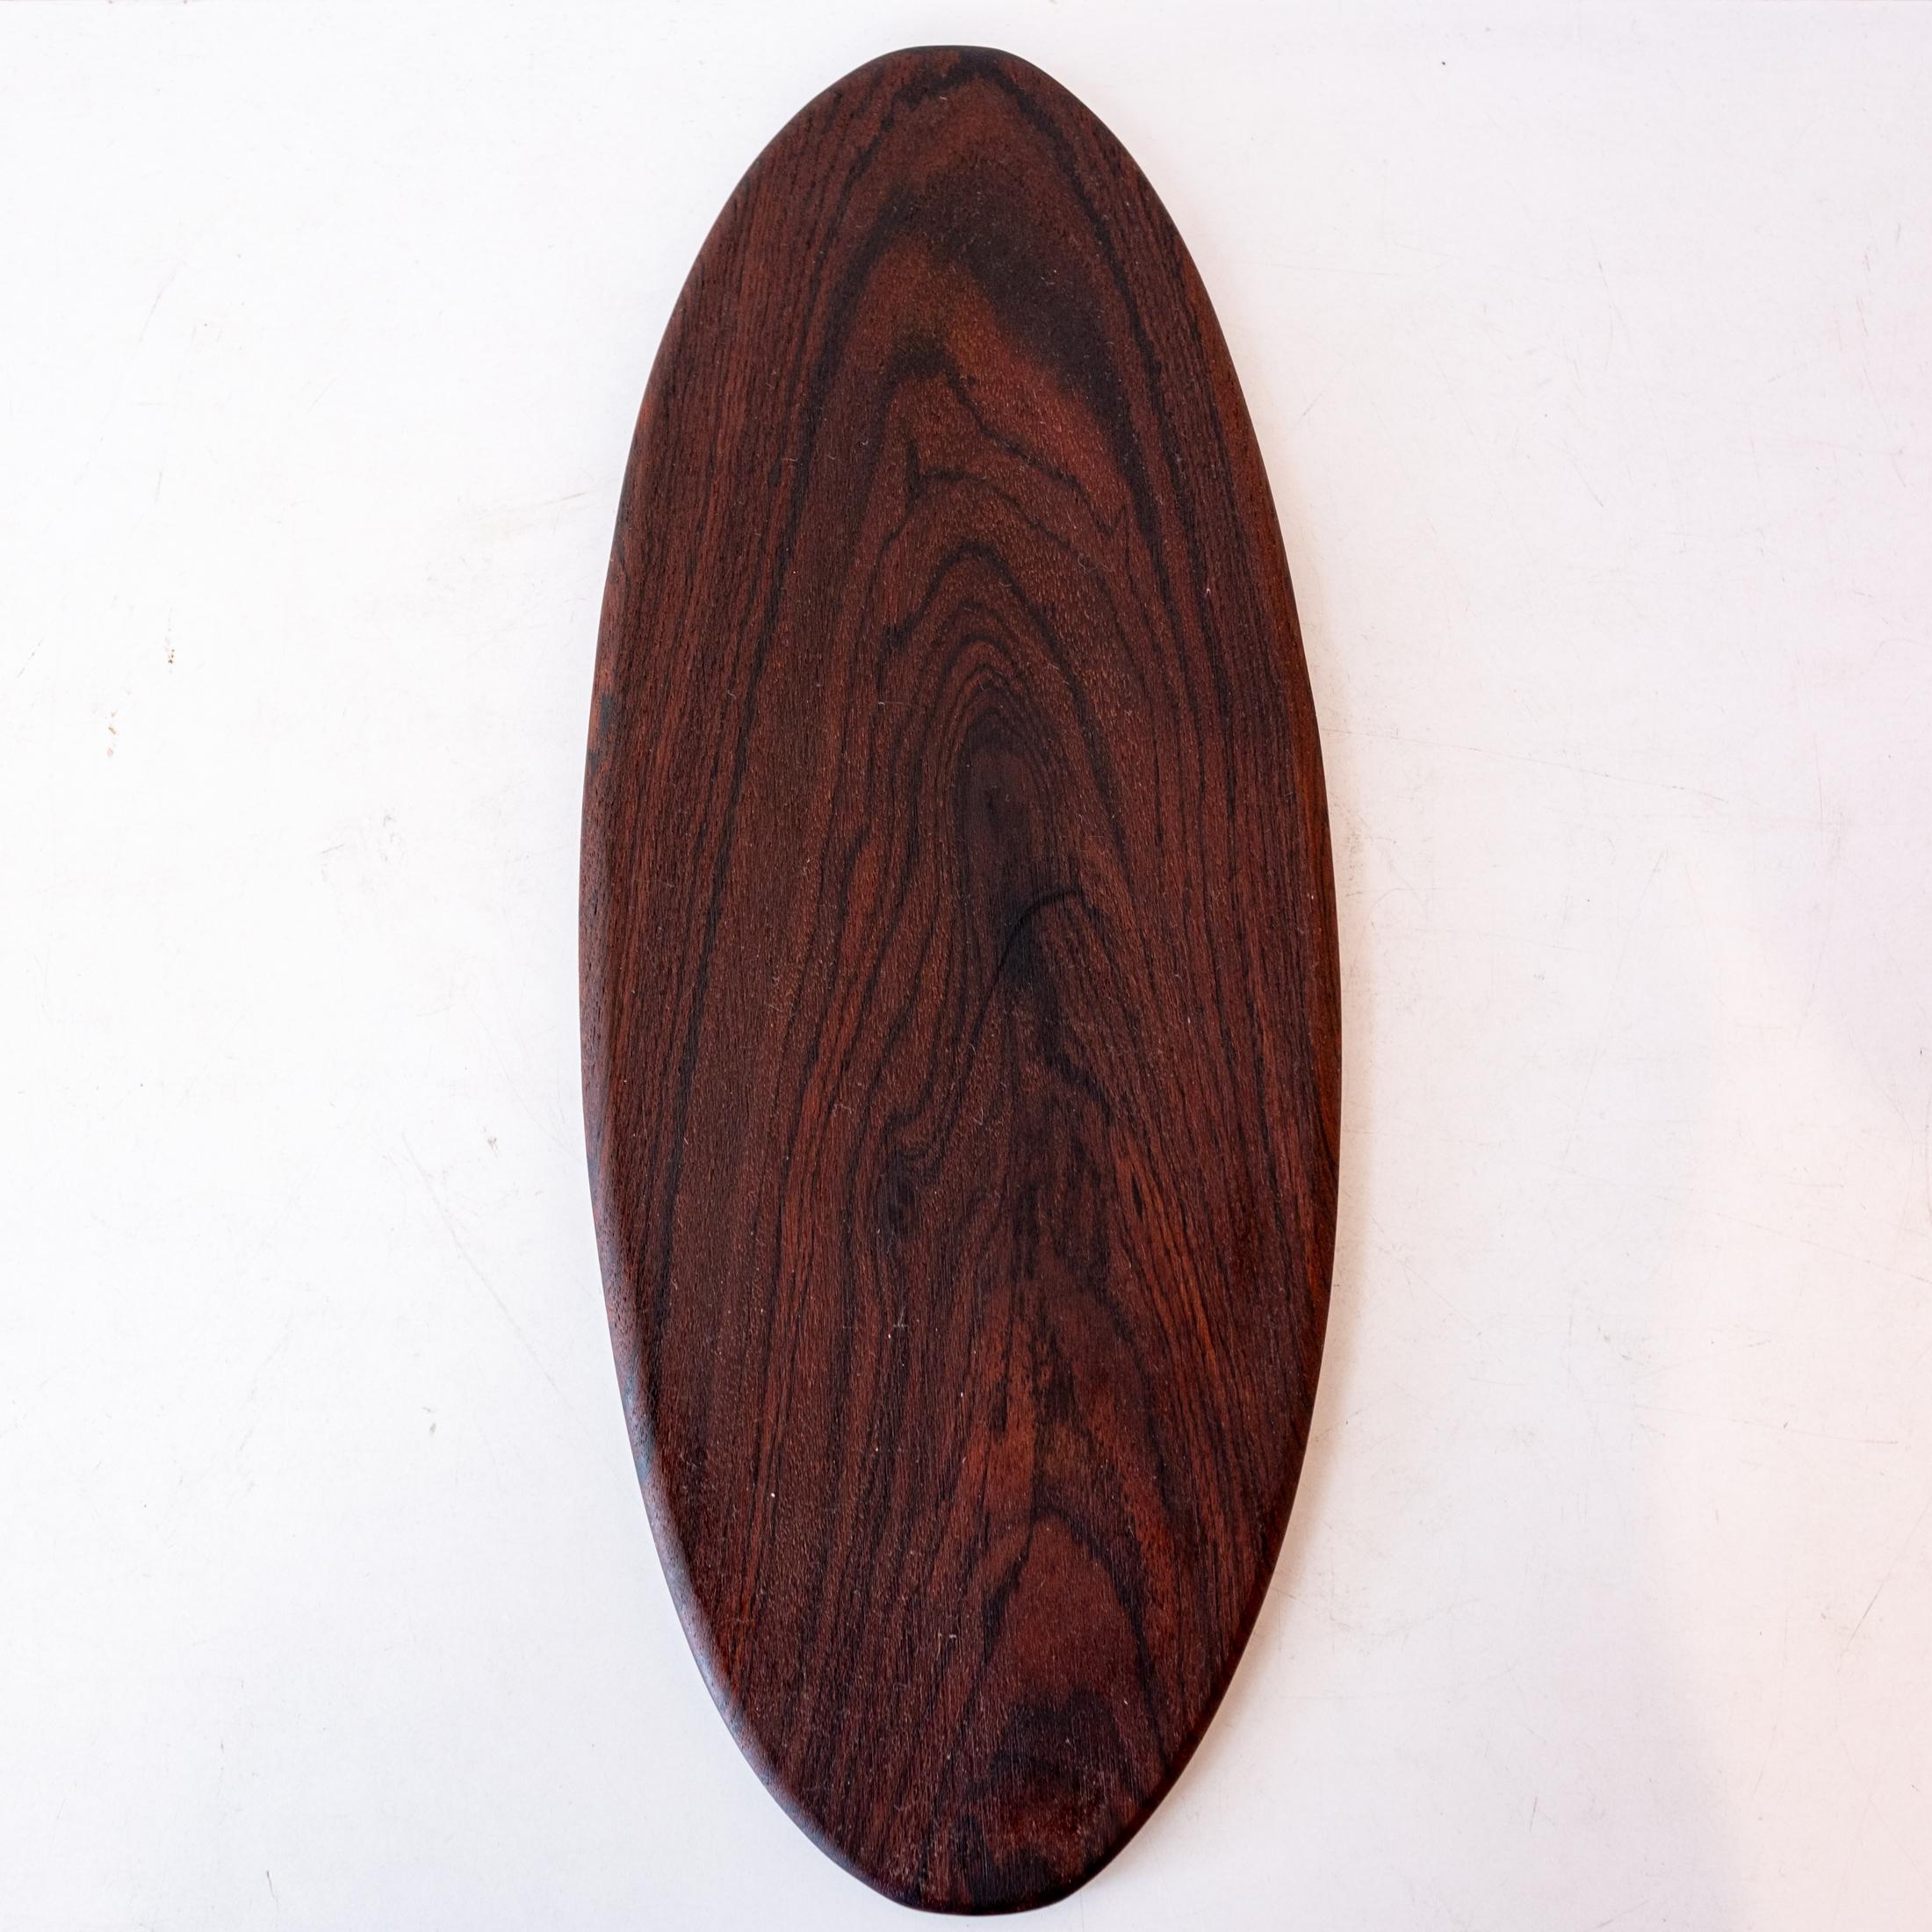 Don Shoemaker cocobolo cutting board. It includes his label on the bottom.